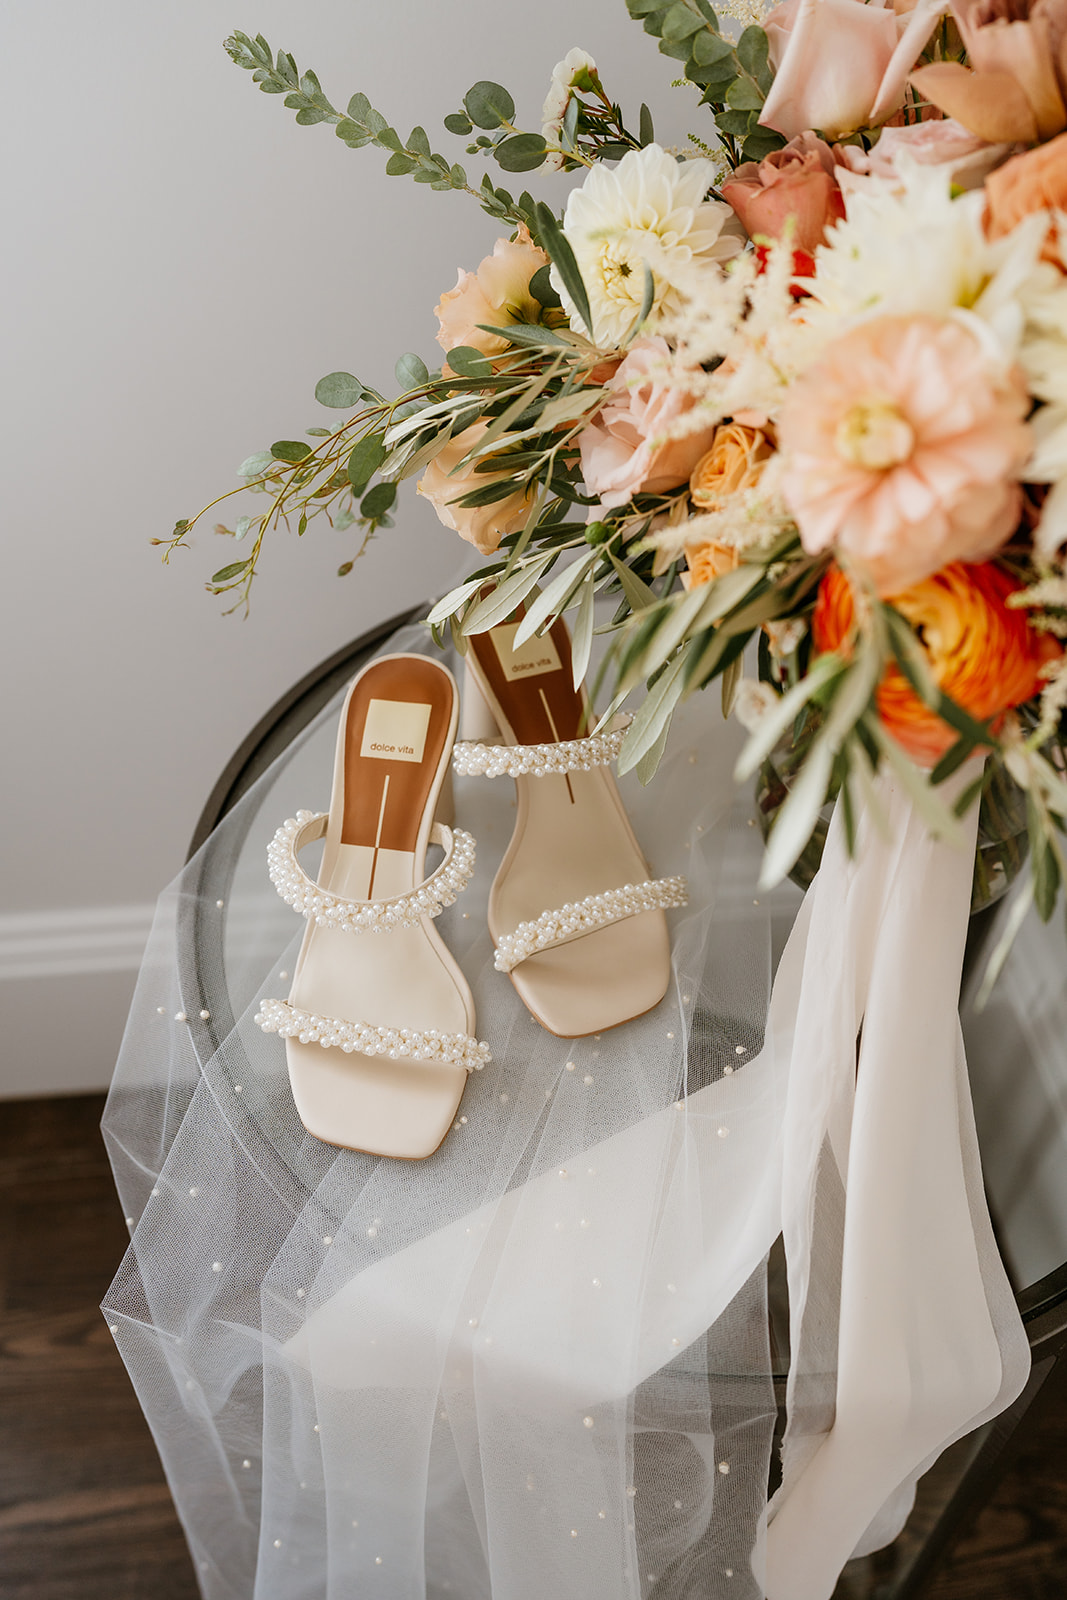 Summer-themed bridal bouquet featuring vibrant flowers accompanied by elegant white bridal shoes sitting on a table